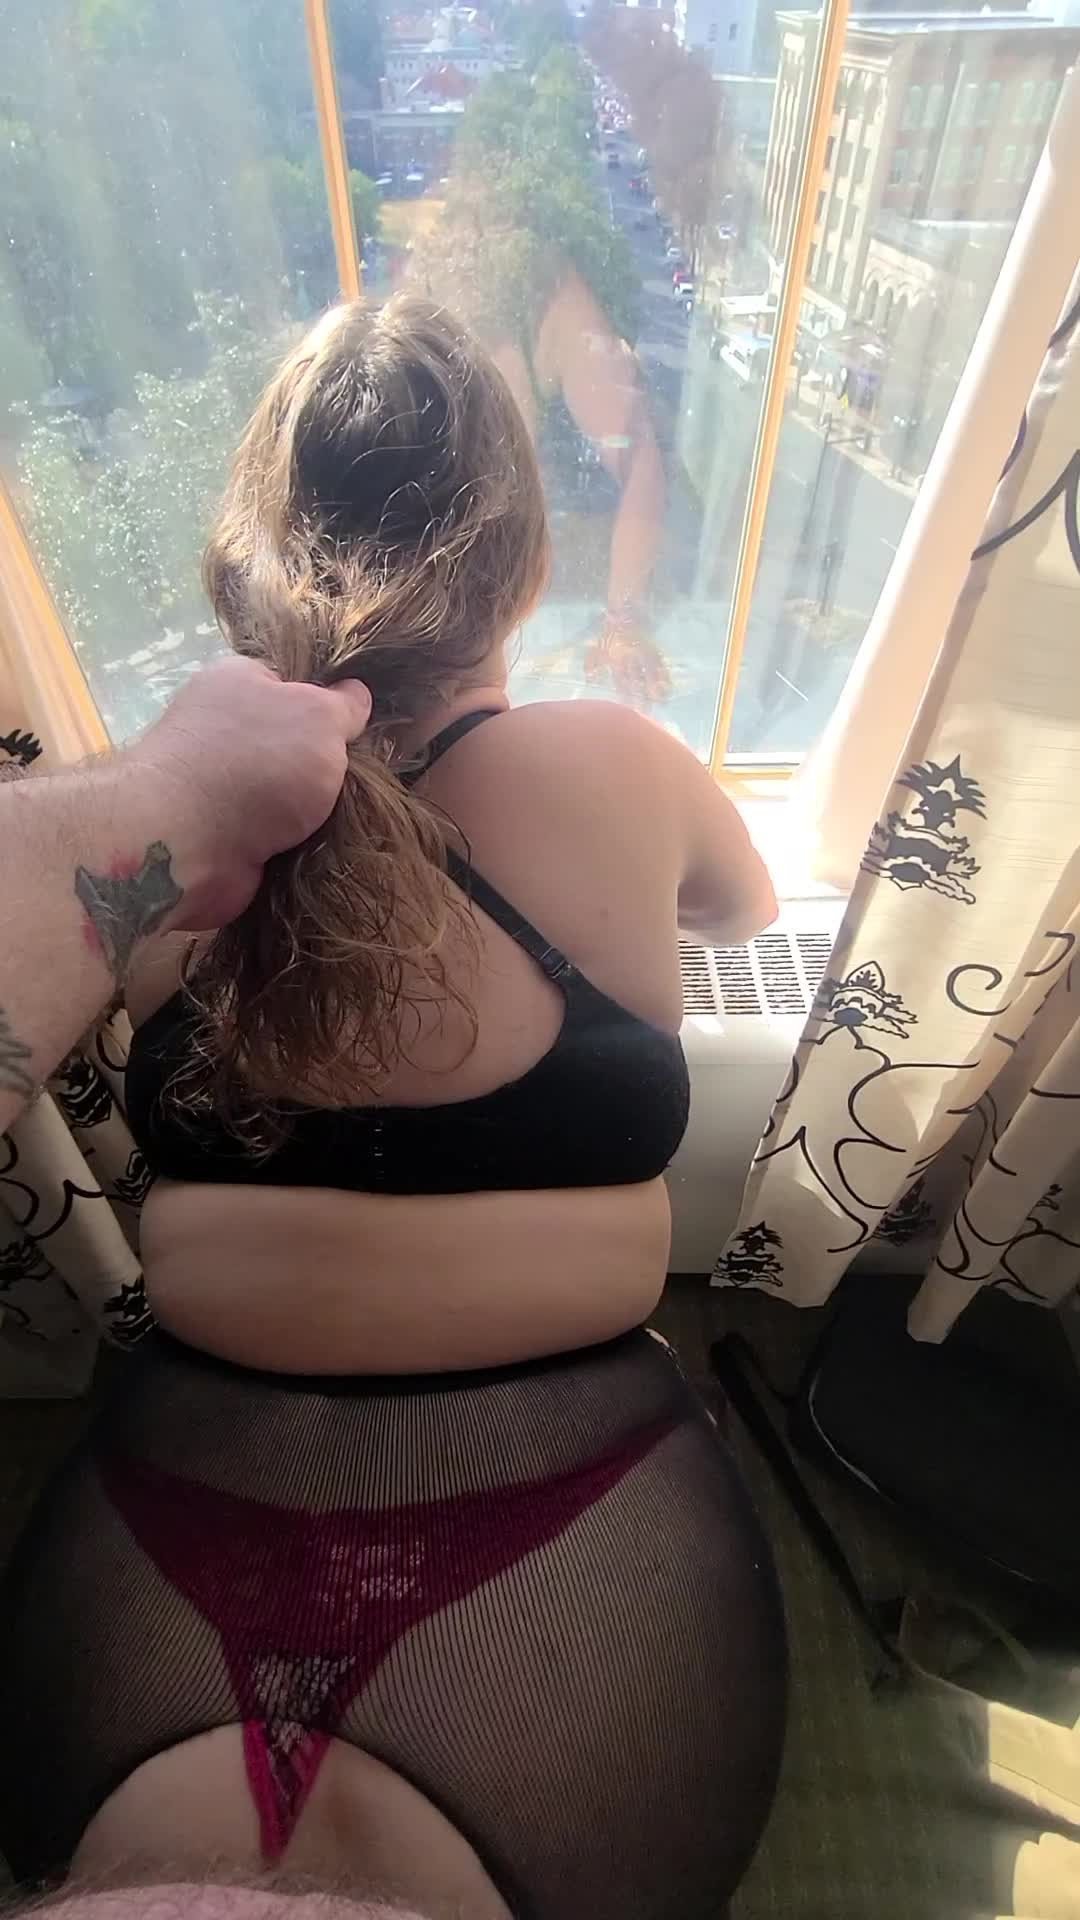 Video post by ExhibCouplePlayTime